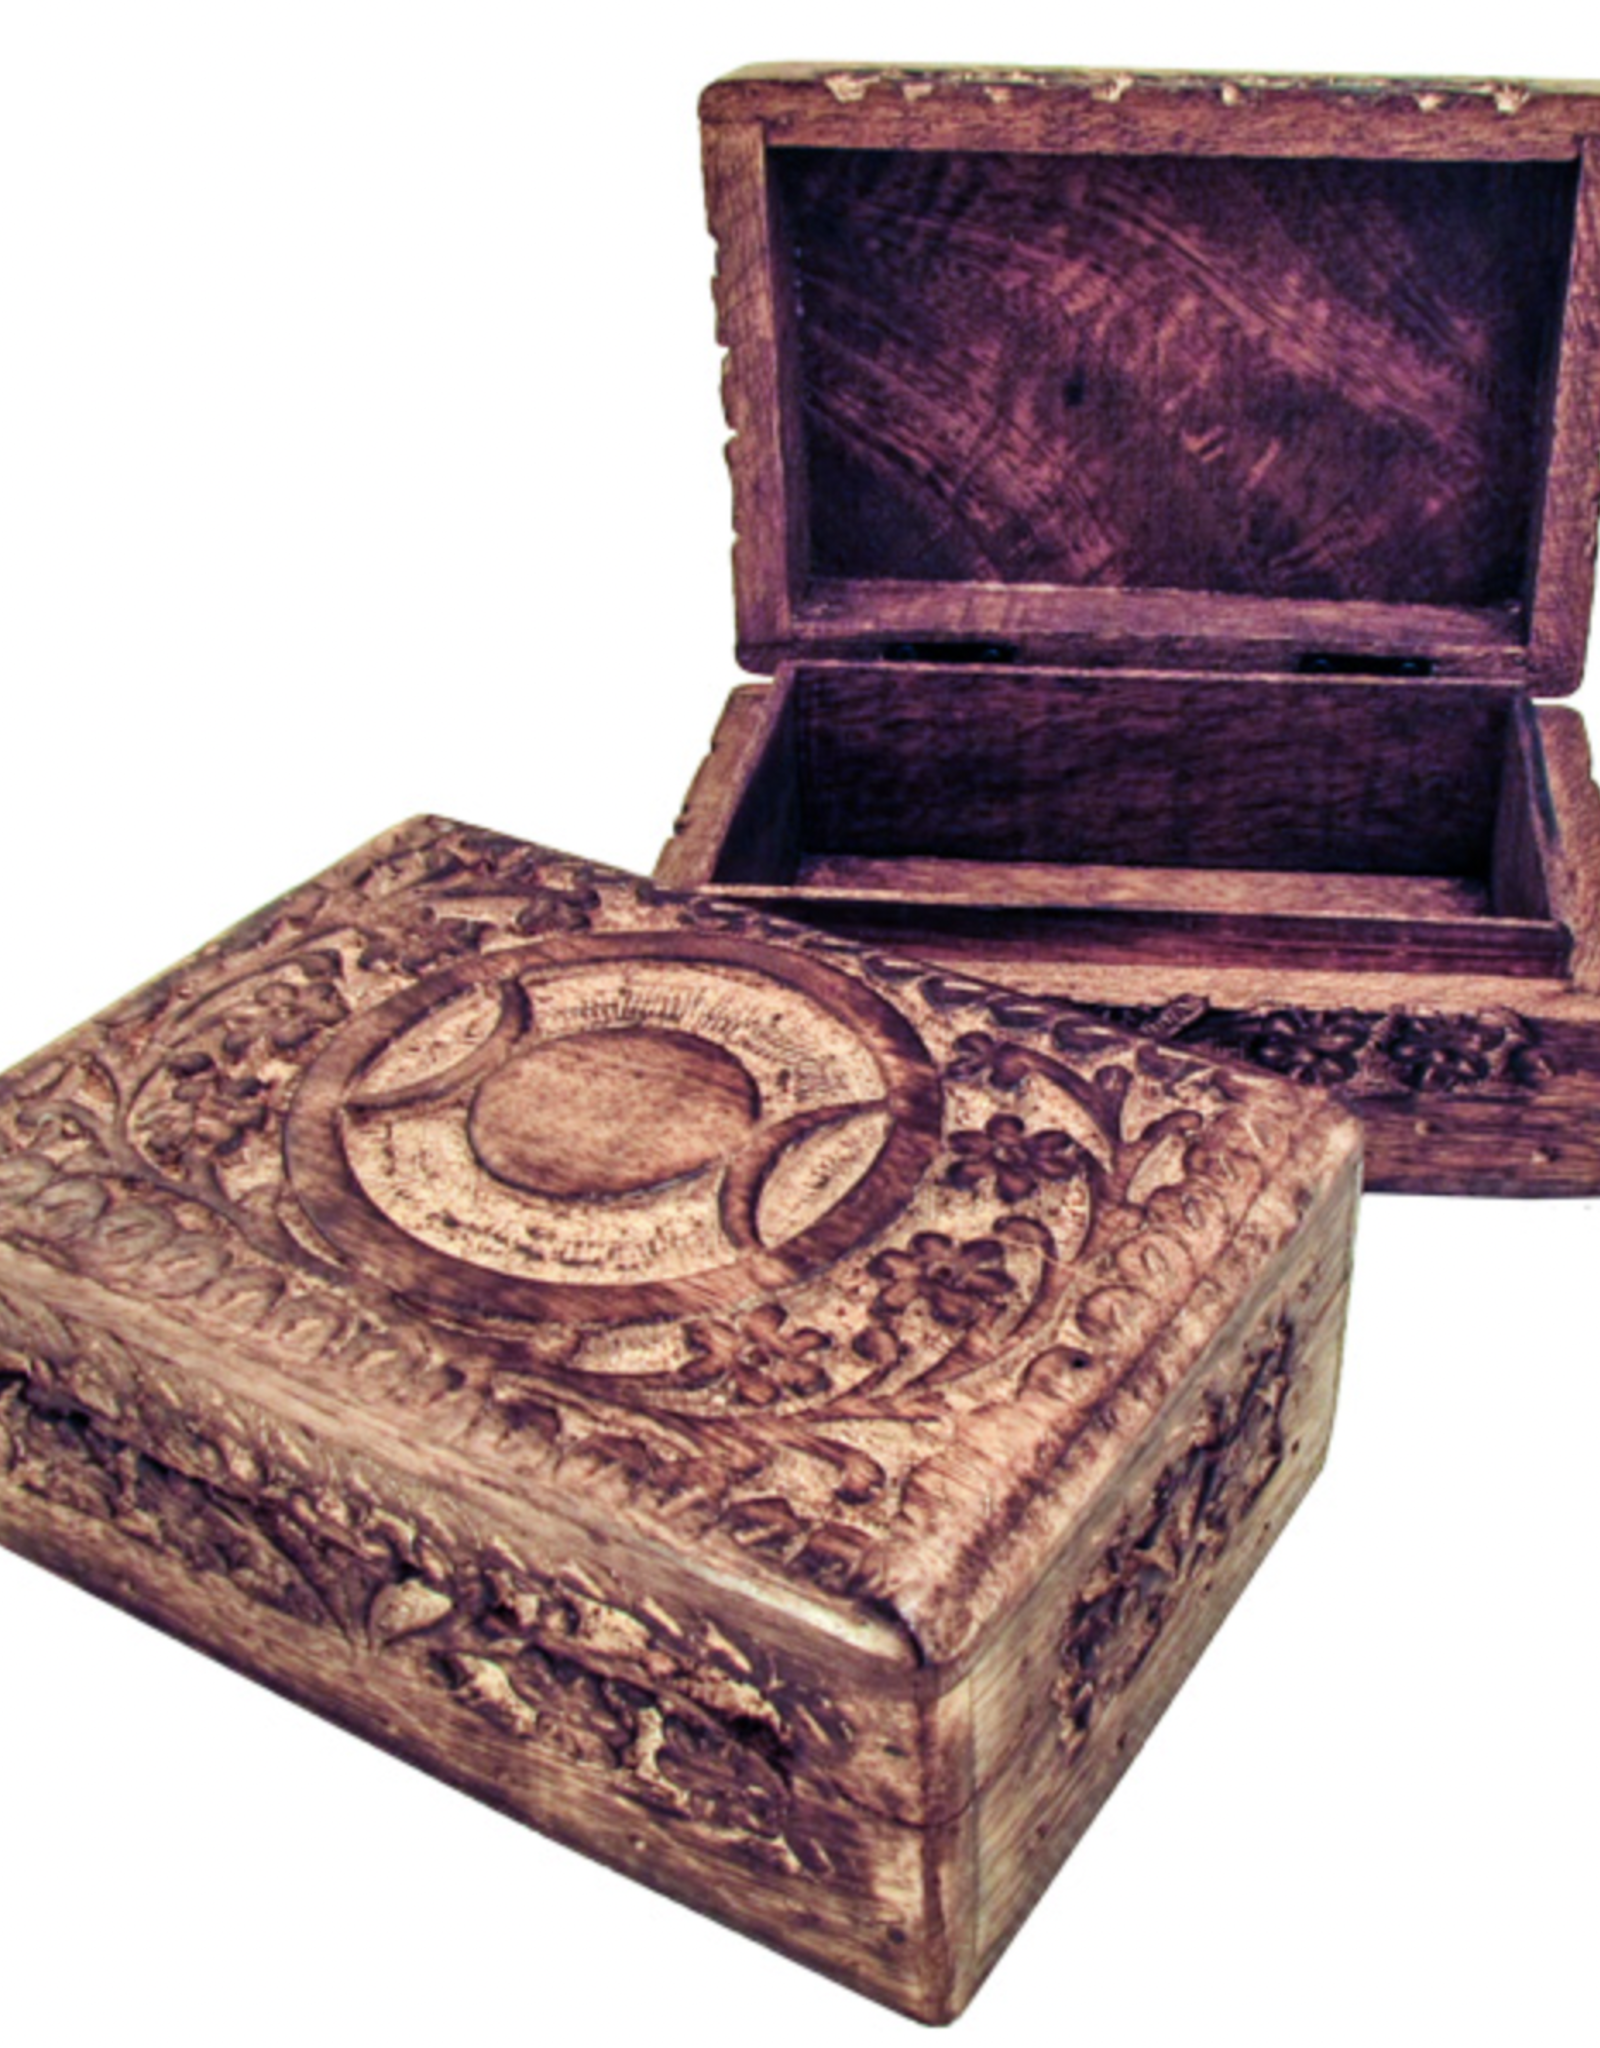 Carved Wood Box - Moon Phase